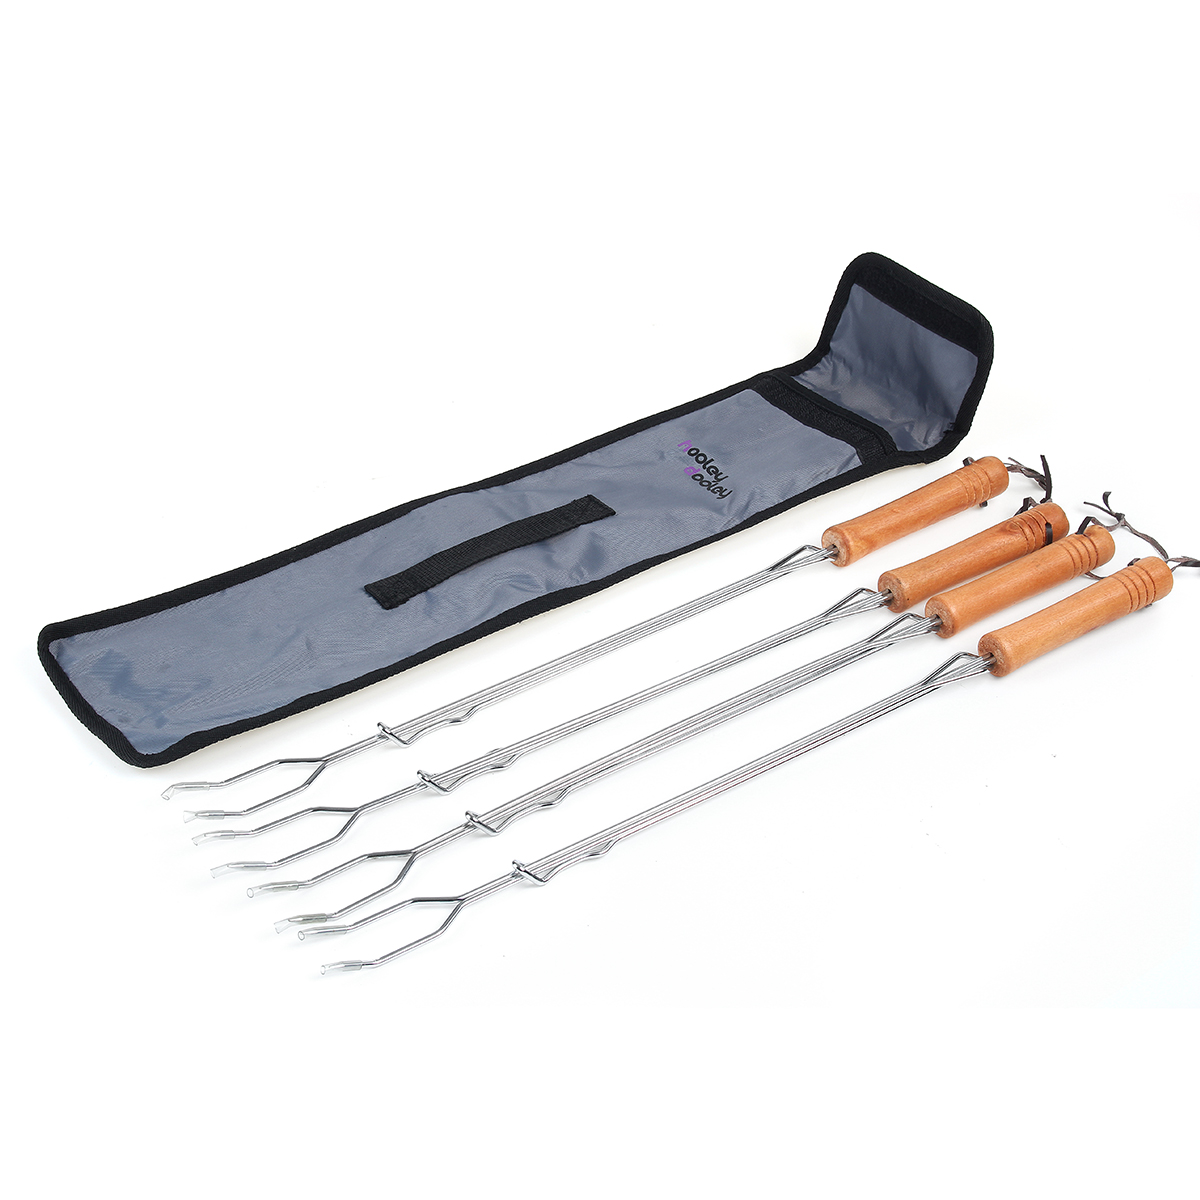 4pcsset-BBQ-Stainless-Steel-Telescopic-Barbecue-Forks-Outdoor-Barbecue-Tools-1812527-4